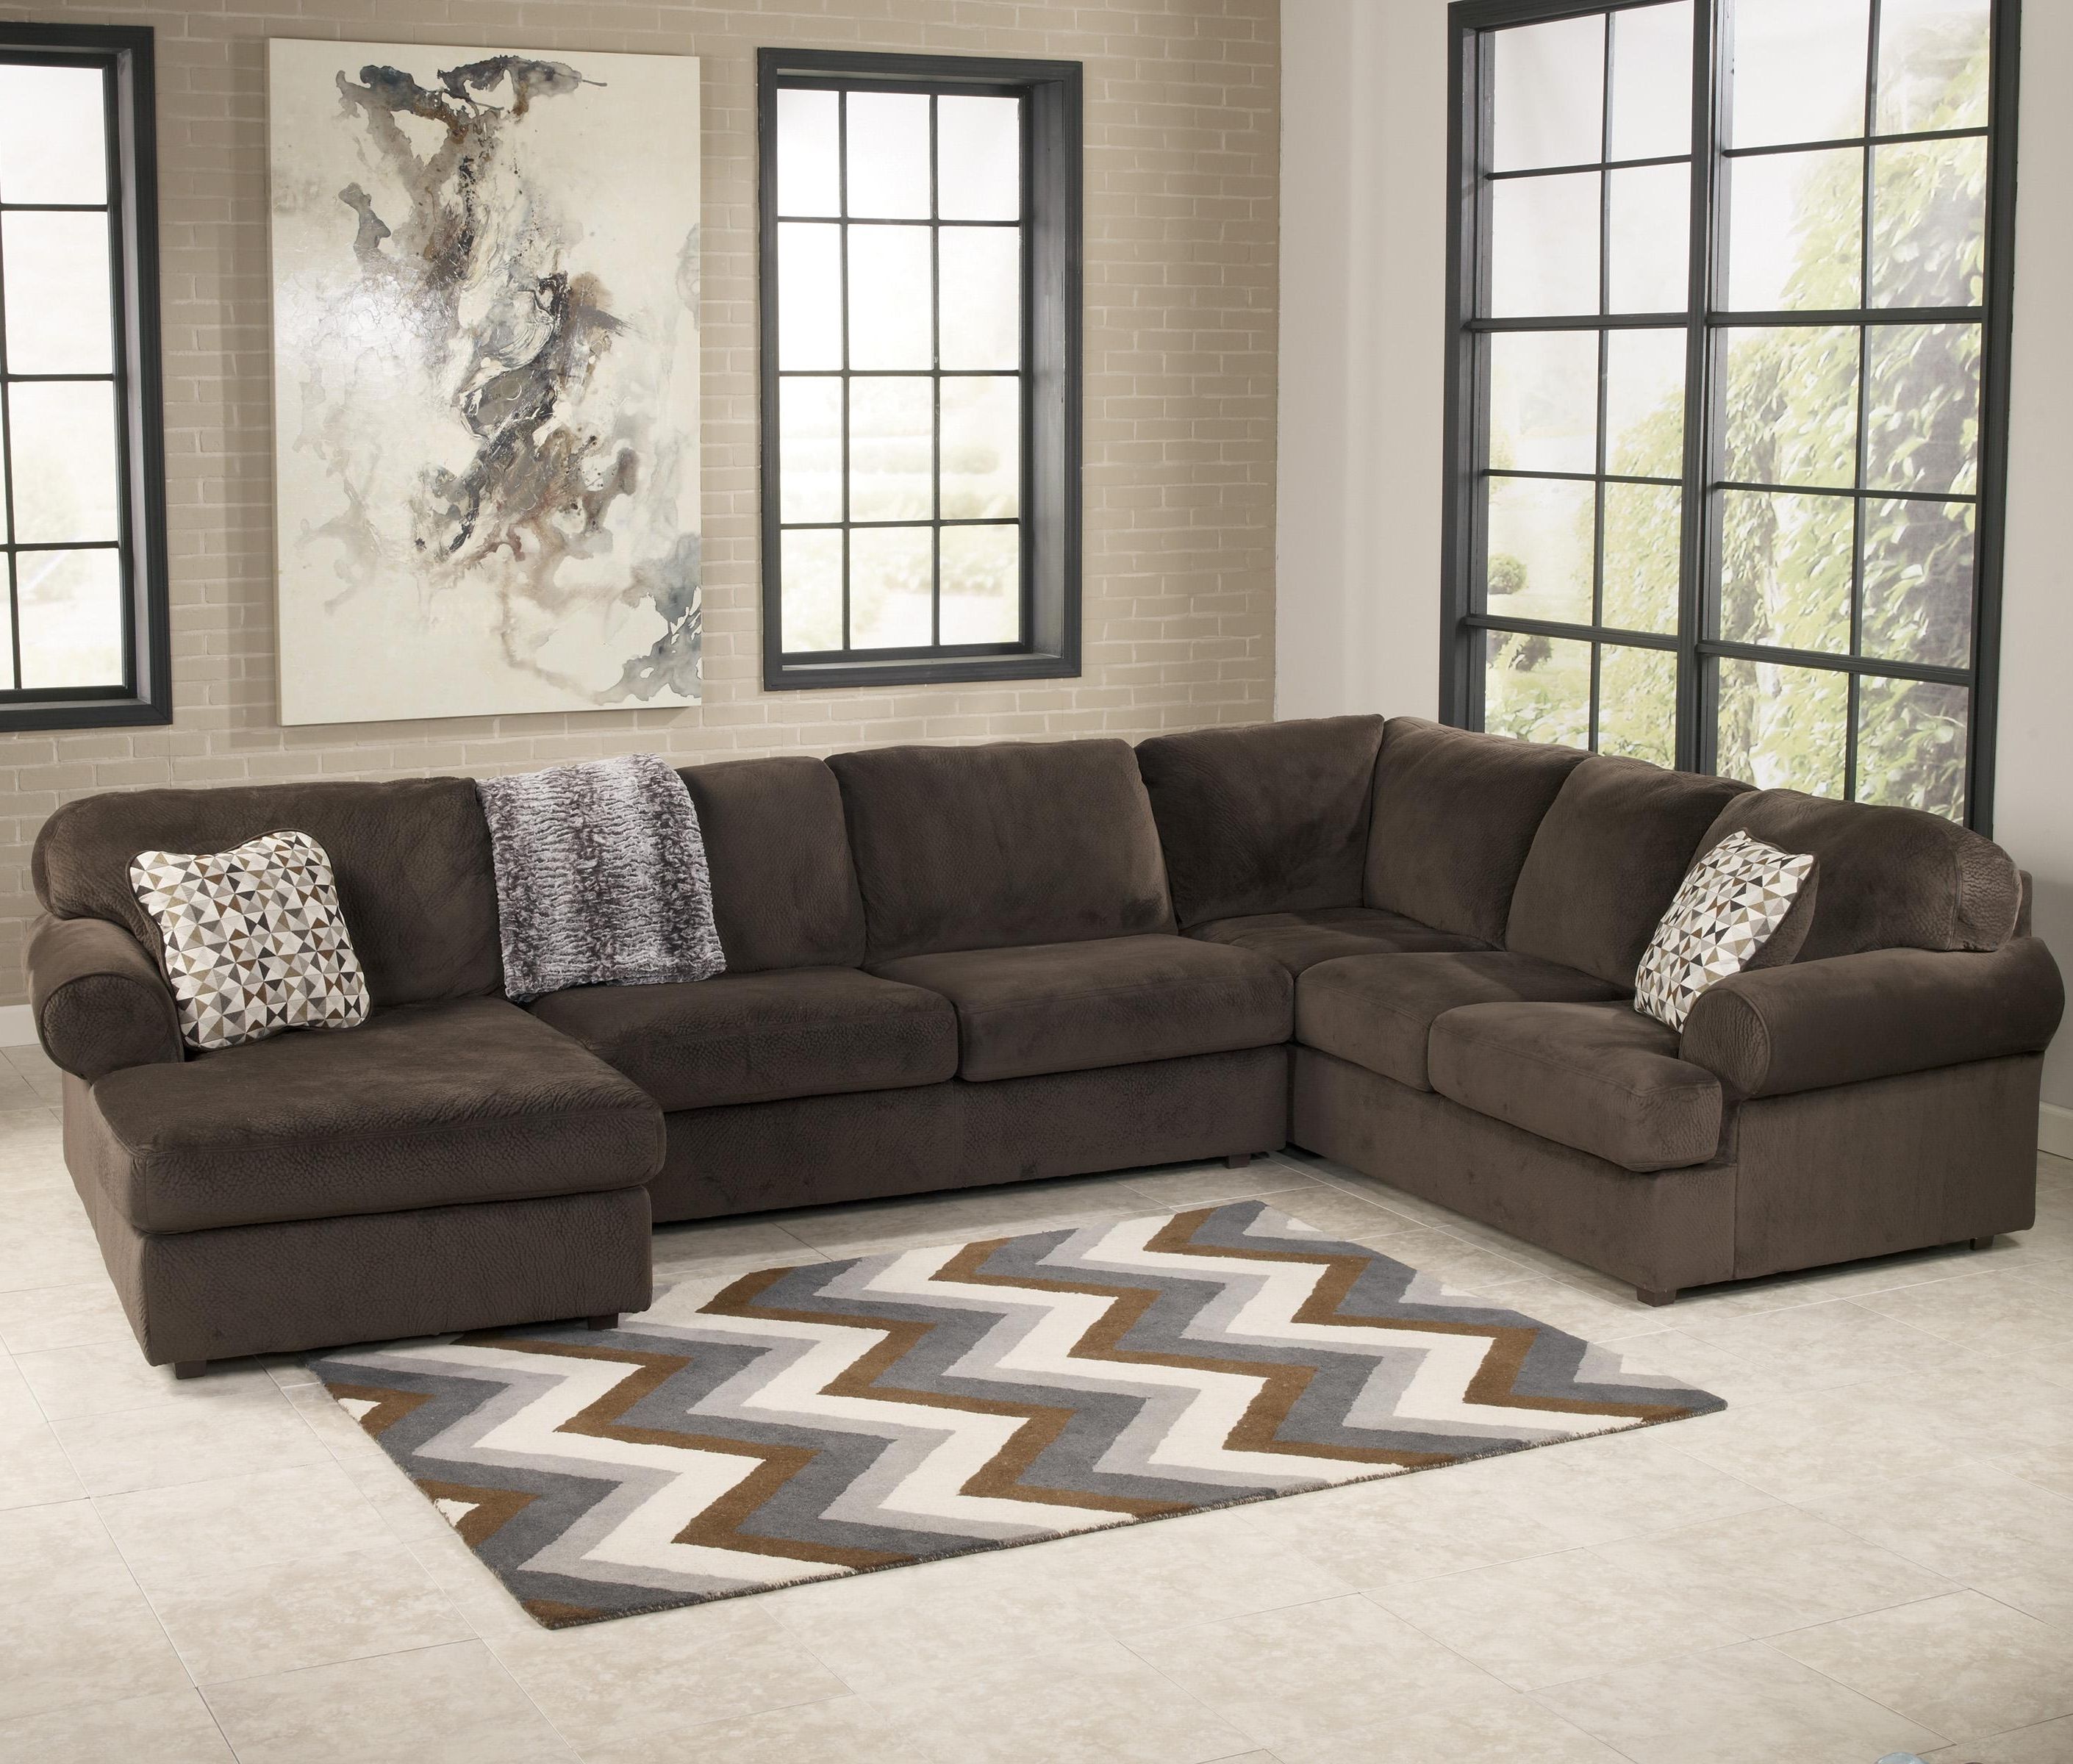 Chocolate Sectional Sofas Within Widely Used Signature Designashley Jessa Place – Chocolate Casual (View 1 of 20)